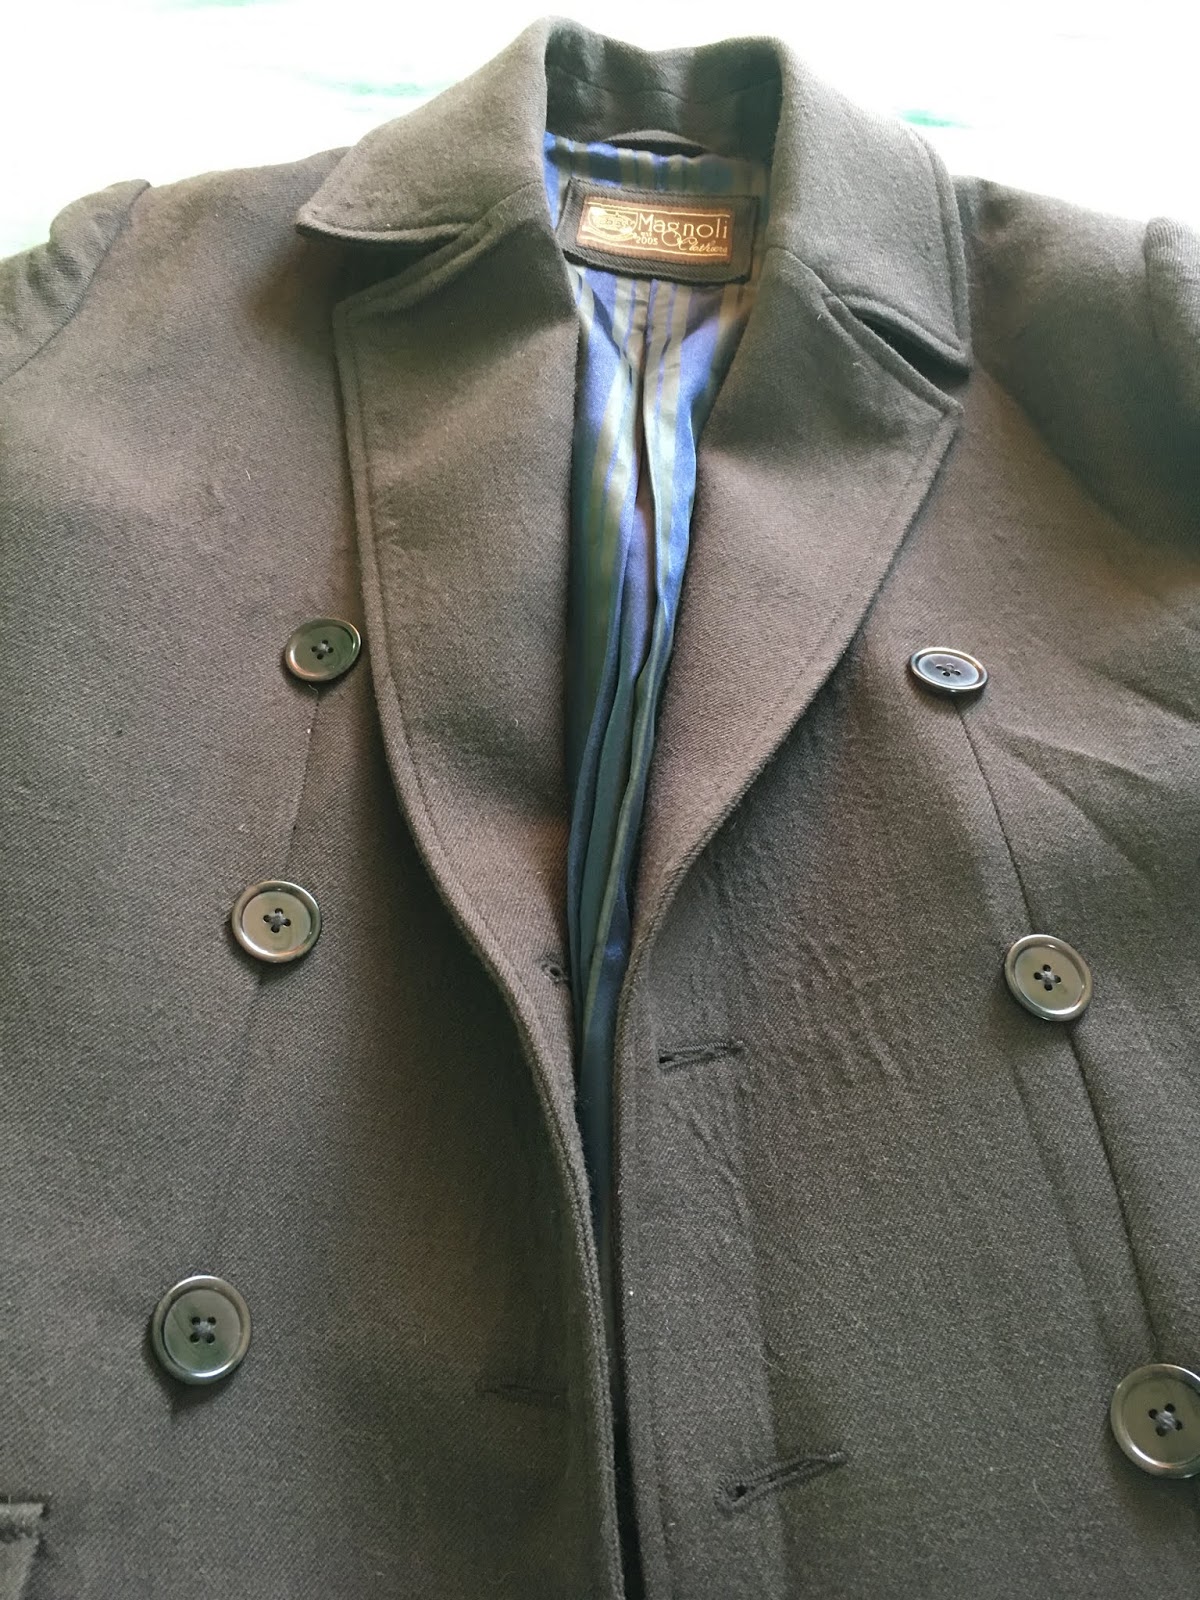 Magnoli Clothiers - Time Long Coat Review And Guide